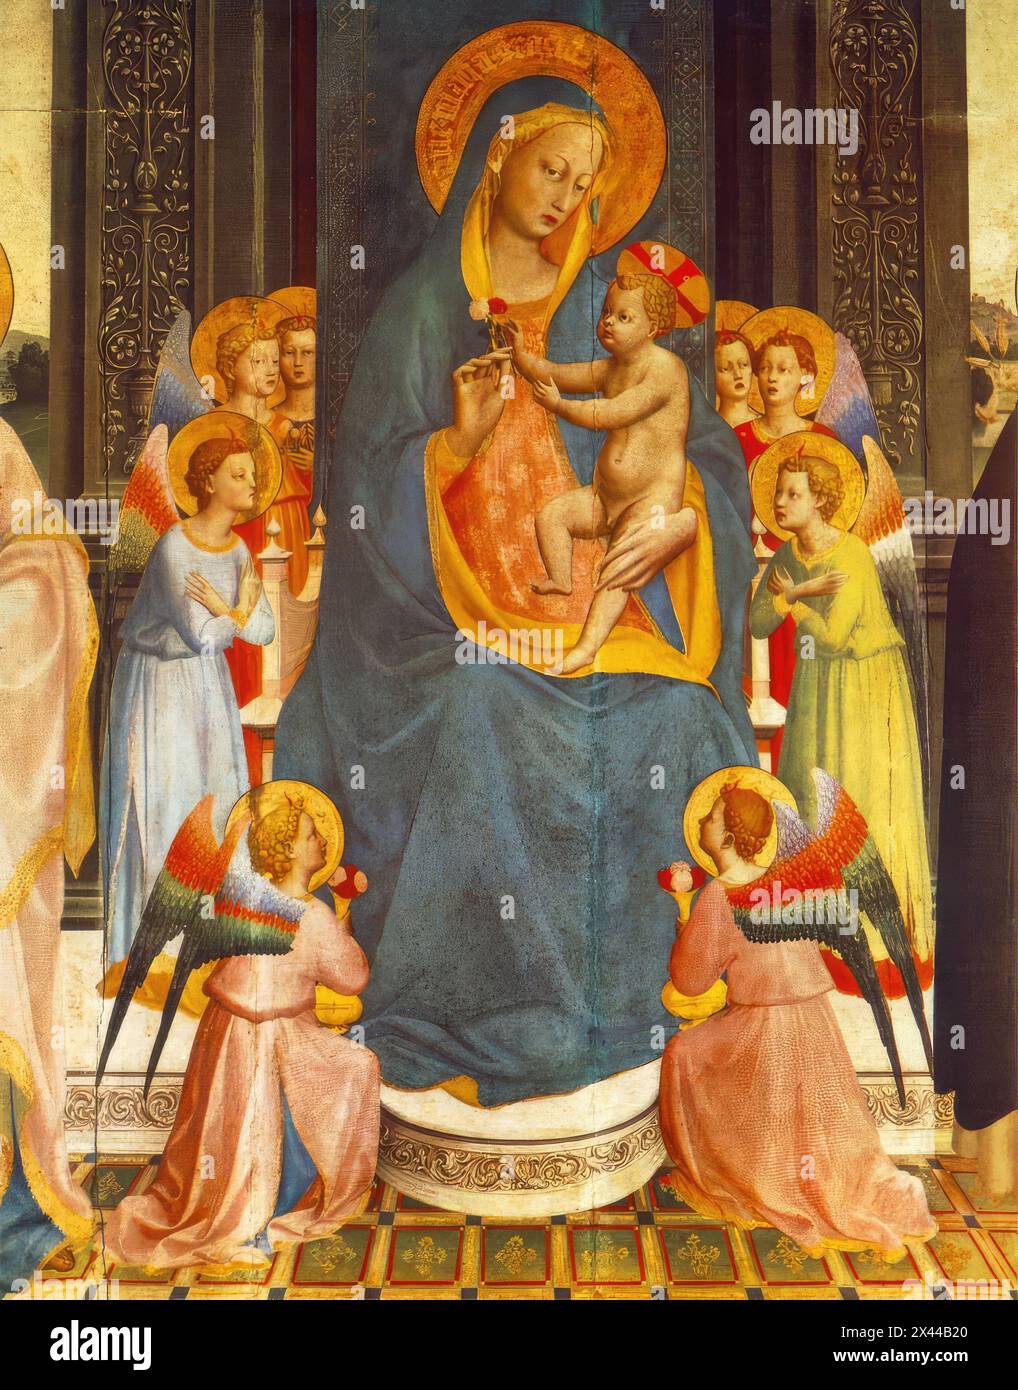 ANGELICO, Fra (b. ca. 1400, Vicchio nell Mugello, d. 1455, Roma)  Fiesole Altarpiece (detail) 1428-30 Tempera on wood, 212 x 237 cm (full panel) Chiesa di San Domenico, Fiesole  Originally a triptych, it was radically altered into a single panel in 1501. This picture shows the central part of the panel which was originally the central part of the triptych. On the left part St Thomas of Aquino and St Barnaba, on the right St Dominic and St Peter the Martyr are depicted. The seven pictures of the predella now are in the National Gallery in London.       *** Keywords: *************  Author: ANGEL Stock Photo